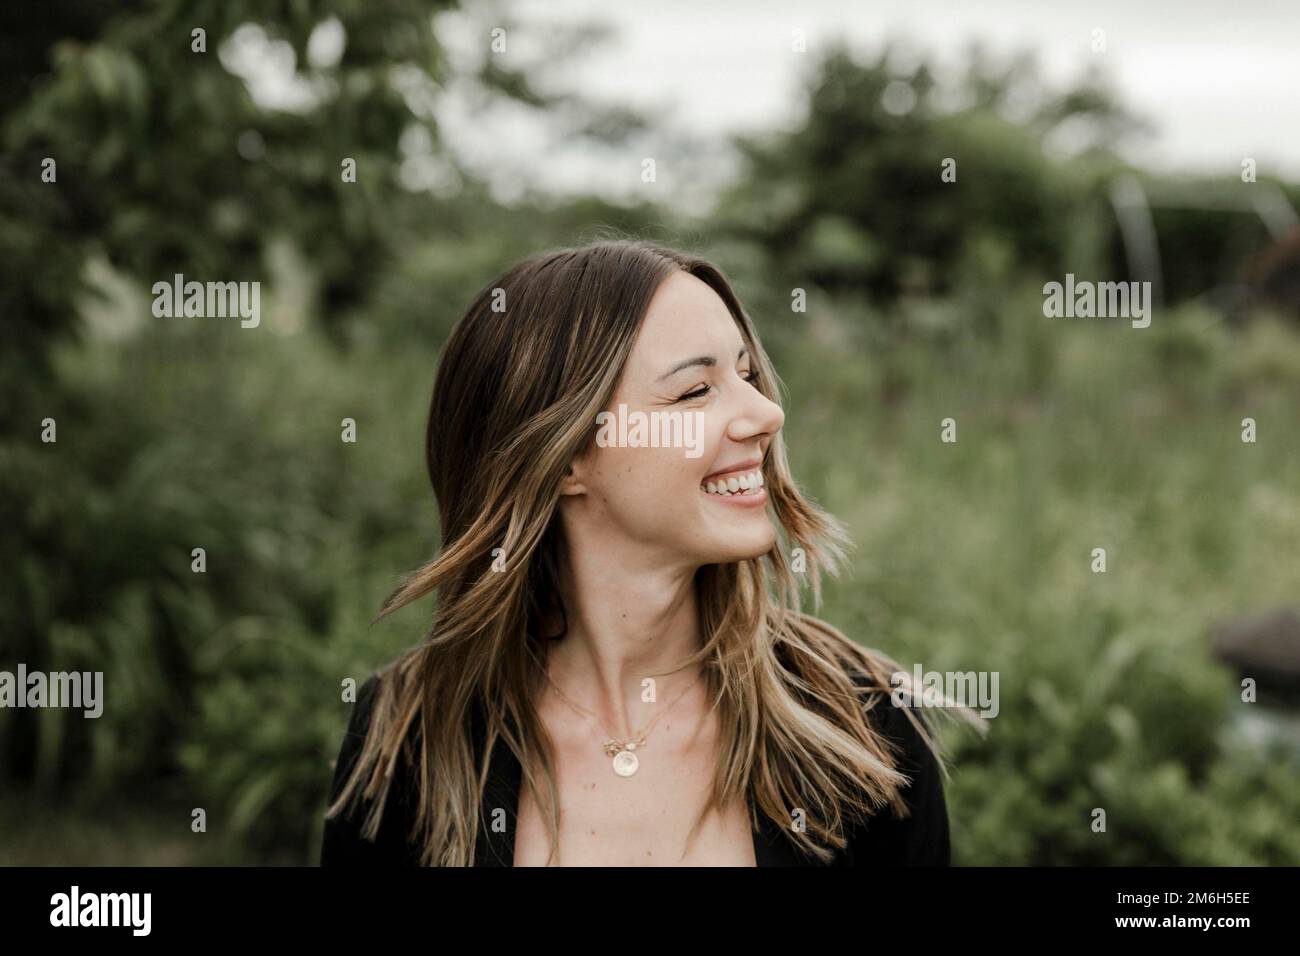 Laughing young woman in portrait, 25, with flying hair Stock Photo